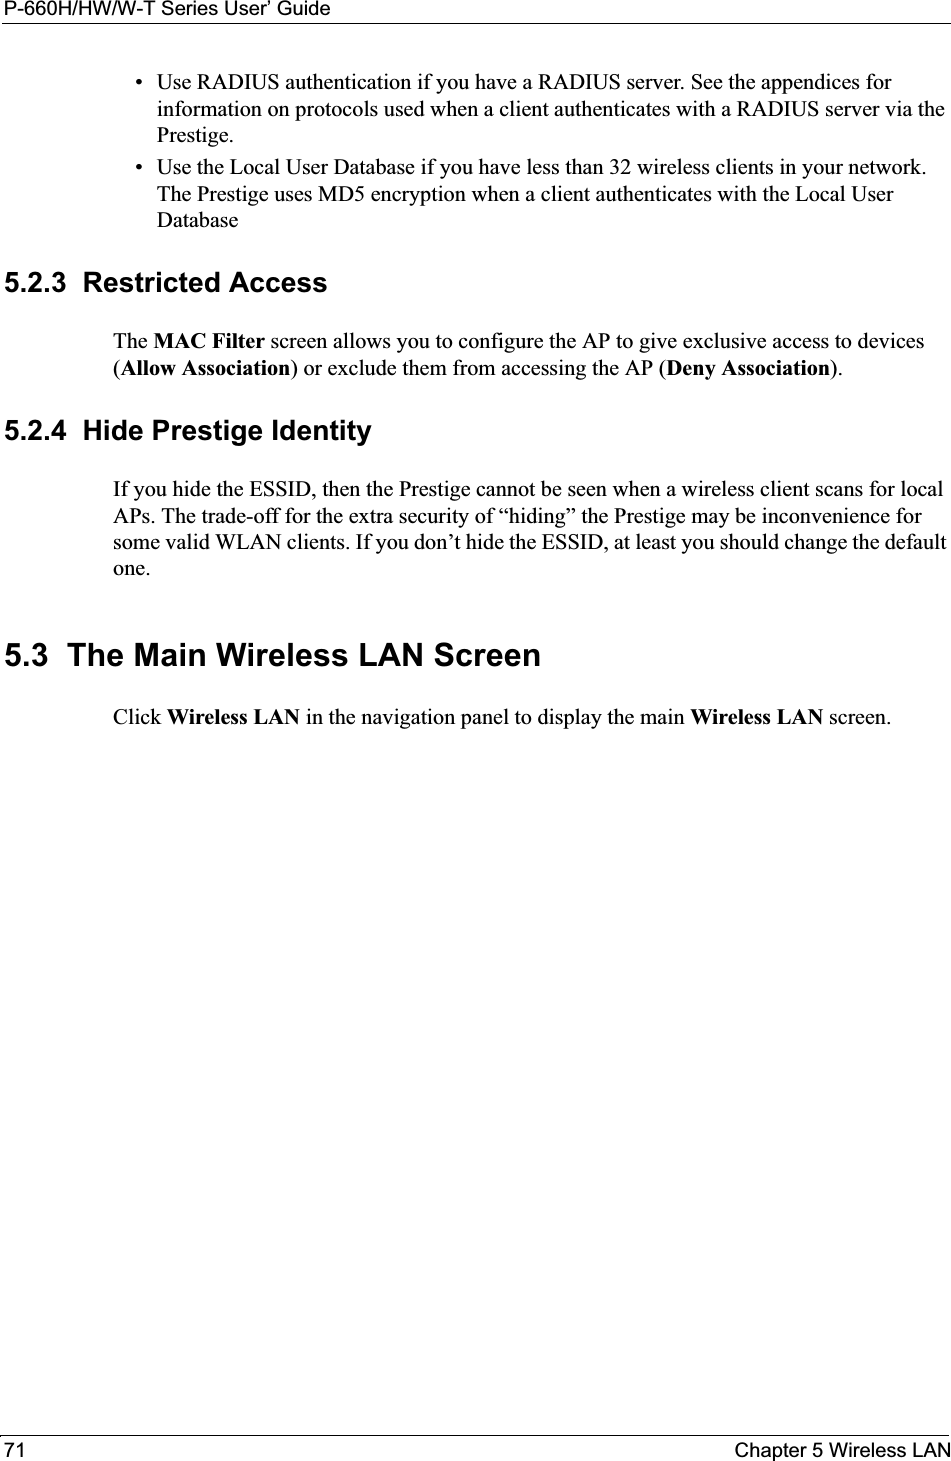 P-660H/HW/W-T Series User’ Guide71 Chapter 5 Wireless LAN• Use RADIUS authentication if you have a RADIUS server. See the appendices for information on protocols used when a client authenticates with a RADIUS server via the Prestige.• Use the Local User Database if you have less than 32 wireless clients in your network. The Prestige uses MD5 encryption when a client authenticates with the Local User Database 5.2.3  Restricted AccessThe MAC Filter screen allows you to configure the AP to give exclusive access to devices (Allow Association) or exclude them from accessing the AP (Deny Association).5.2.4  Hide Prestige IdentityIf you hide the ESSID, then the Prestige cannot be seen when a wireless client scans for local APs. The trade-off for the extra security of “hiding” the Prestige may be inconvenience for some valid WLAN clients. If you don’t hide the ESSID, at least you should change the default one.5.3  The Main Wireless LAN Screen  Click Wireless LAN in the navigation panel to display the main Wireless LAN screen. 